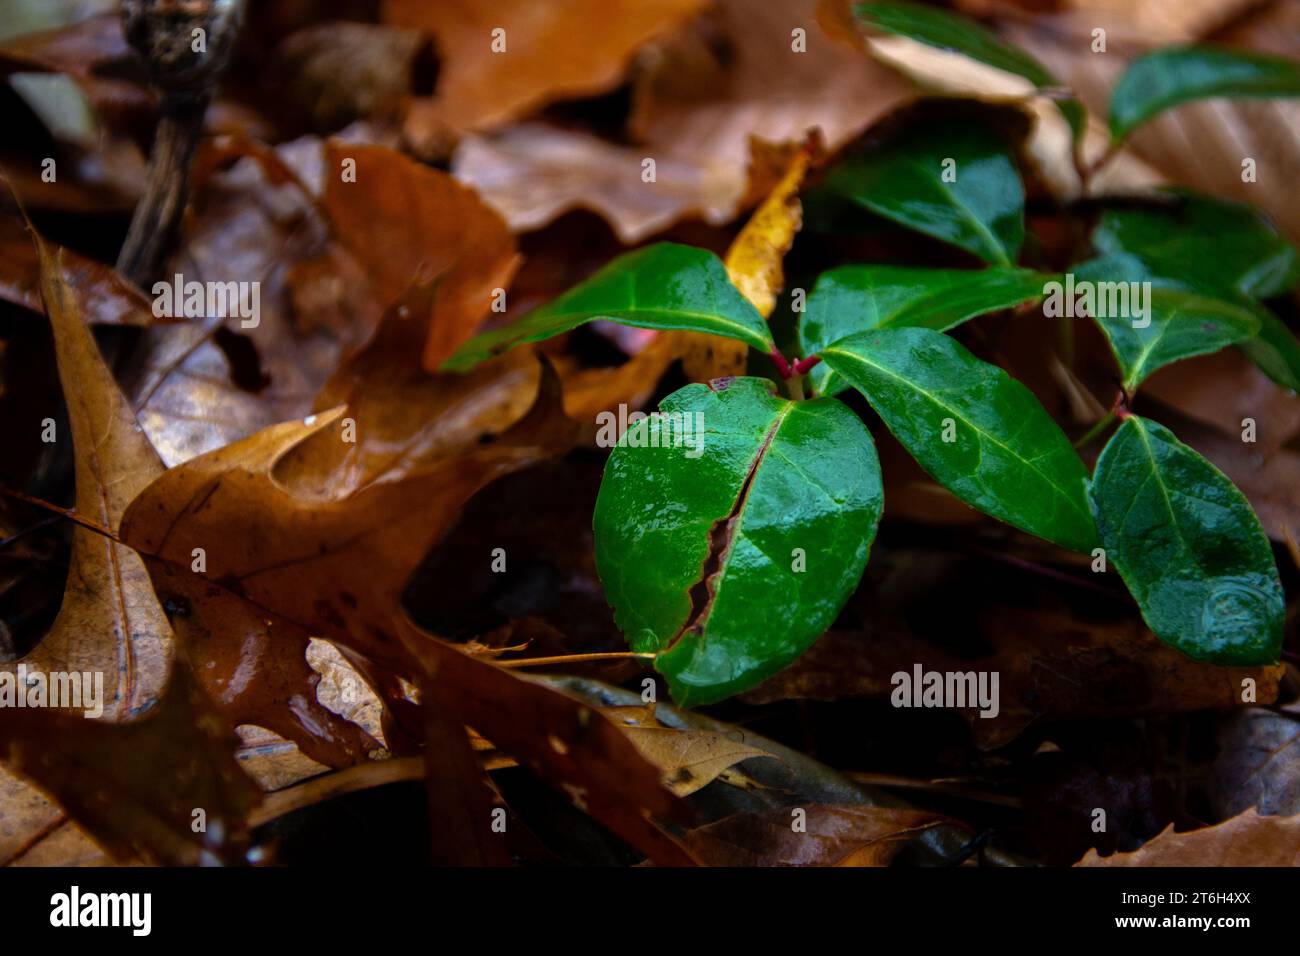 Wintergreen leaves with water droplets.a Stock Photo